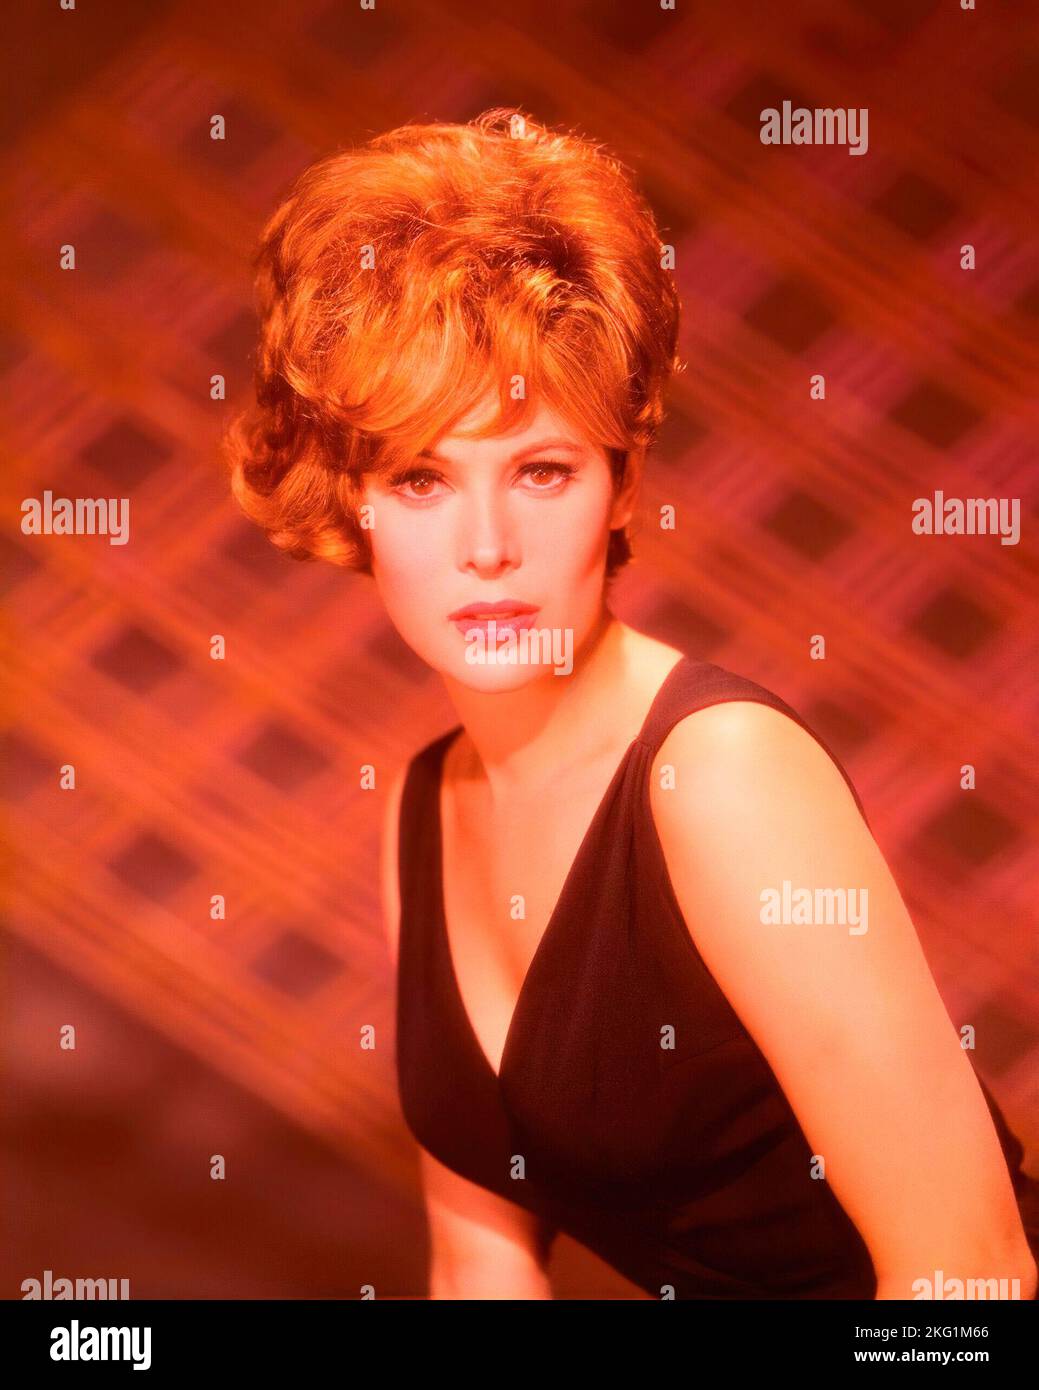 JILL ST. JOHN in WHO'S BEEN SLEEPING IN MY BED? (1963), directed by DANIEL MANN. Credit: PARAMOUNT PICTURES / Album Stock Photo